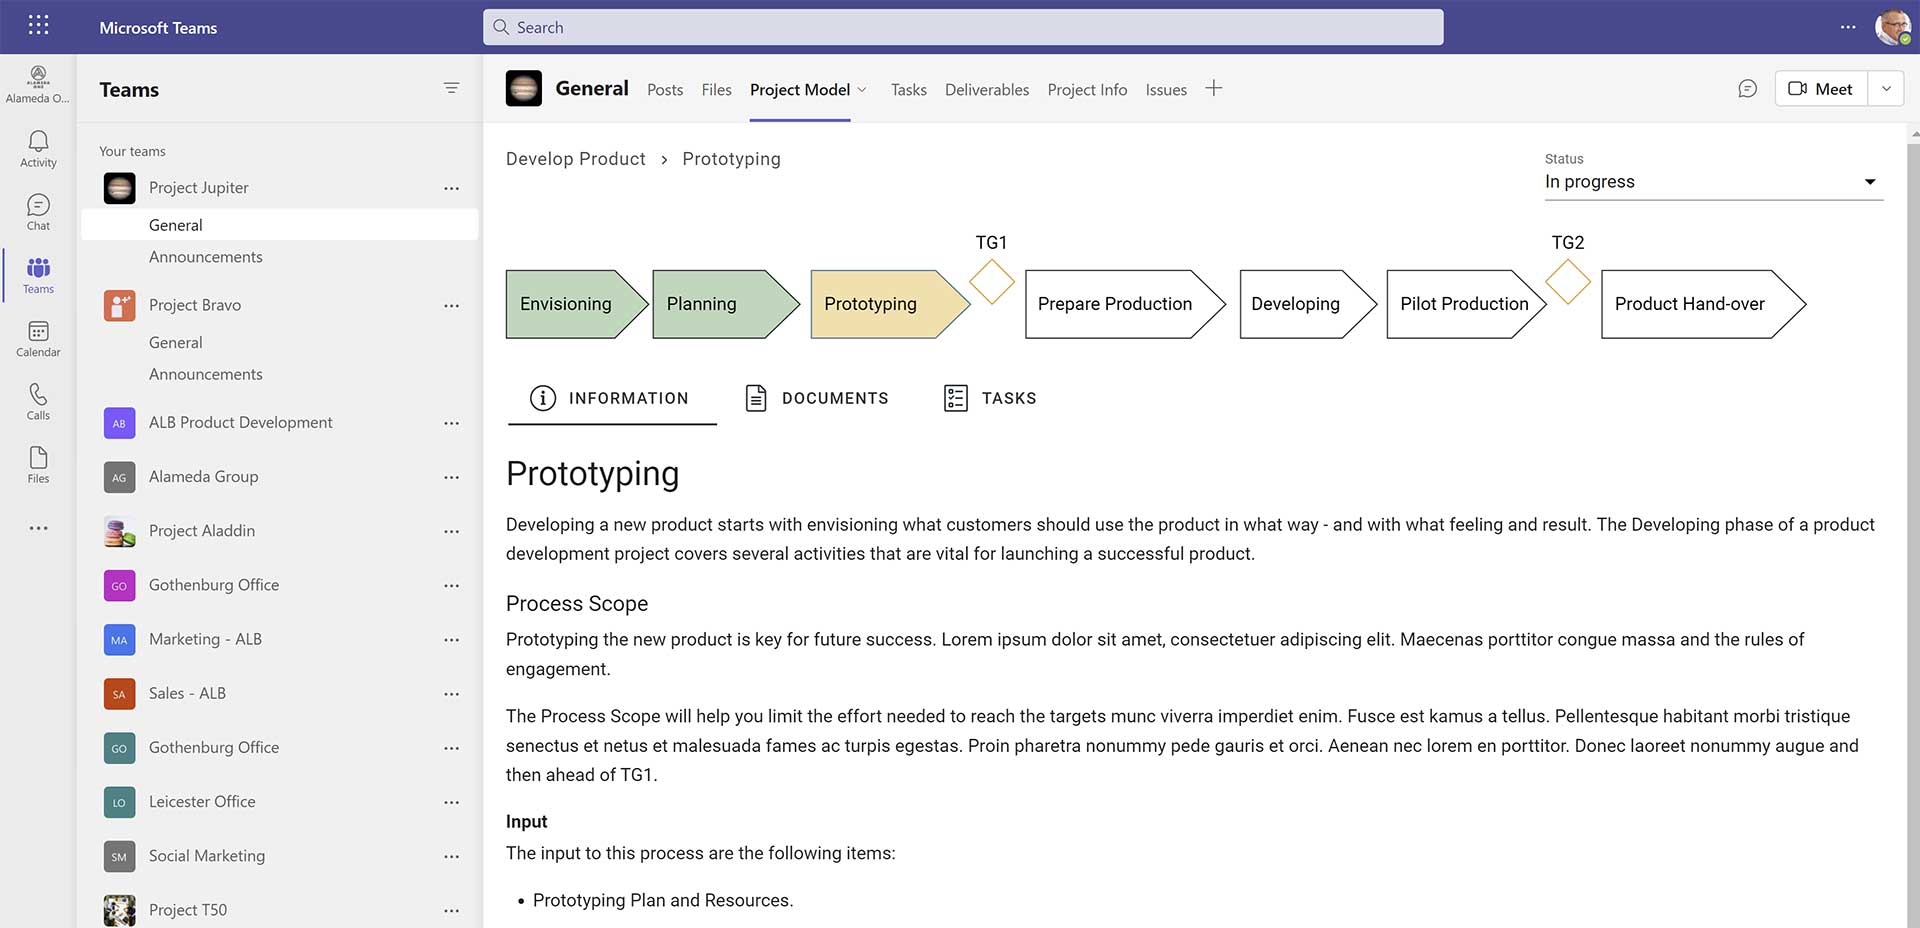 QMS-Image4-Displaying-project-progress-in-Microsoft-Teams-1920-med.jpg